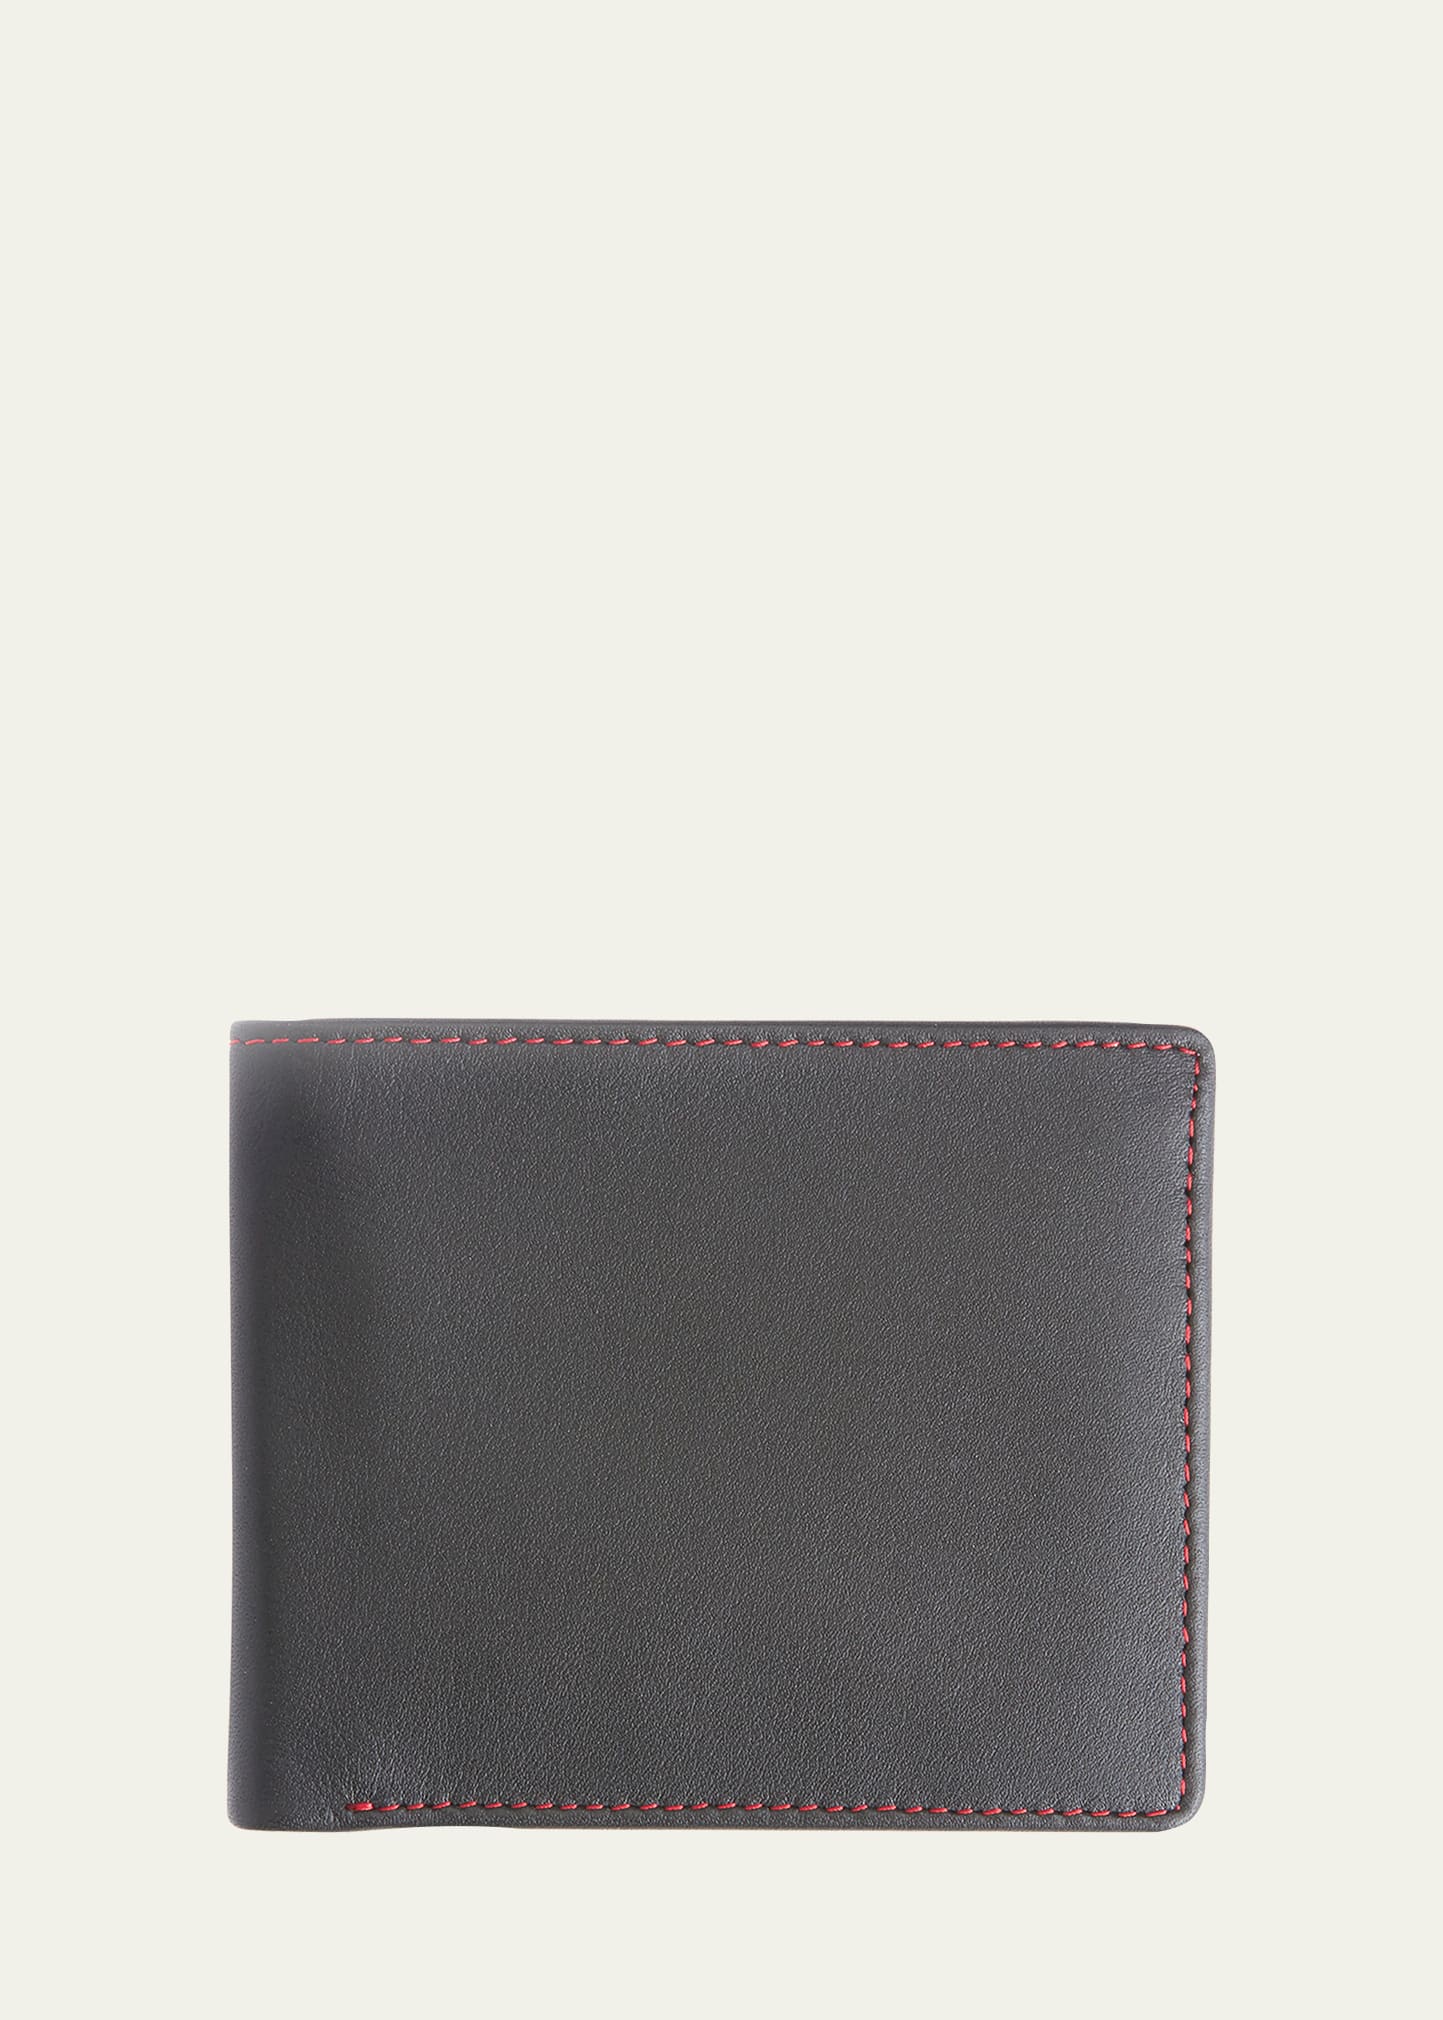 Personalized Leather RFID-Blocking Trifold Wallet